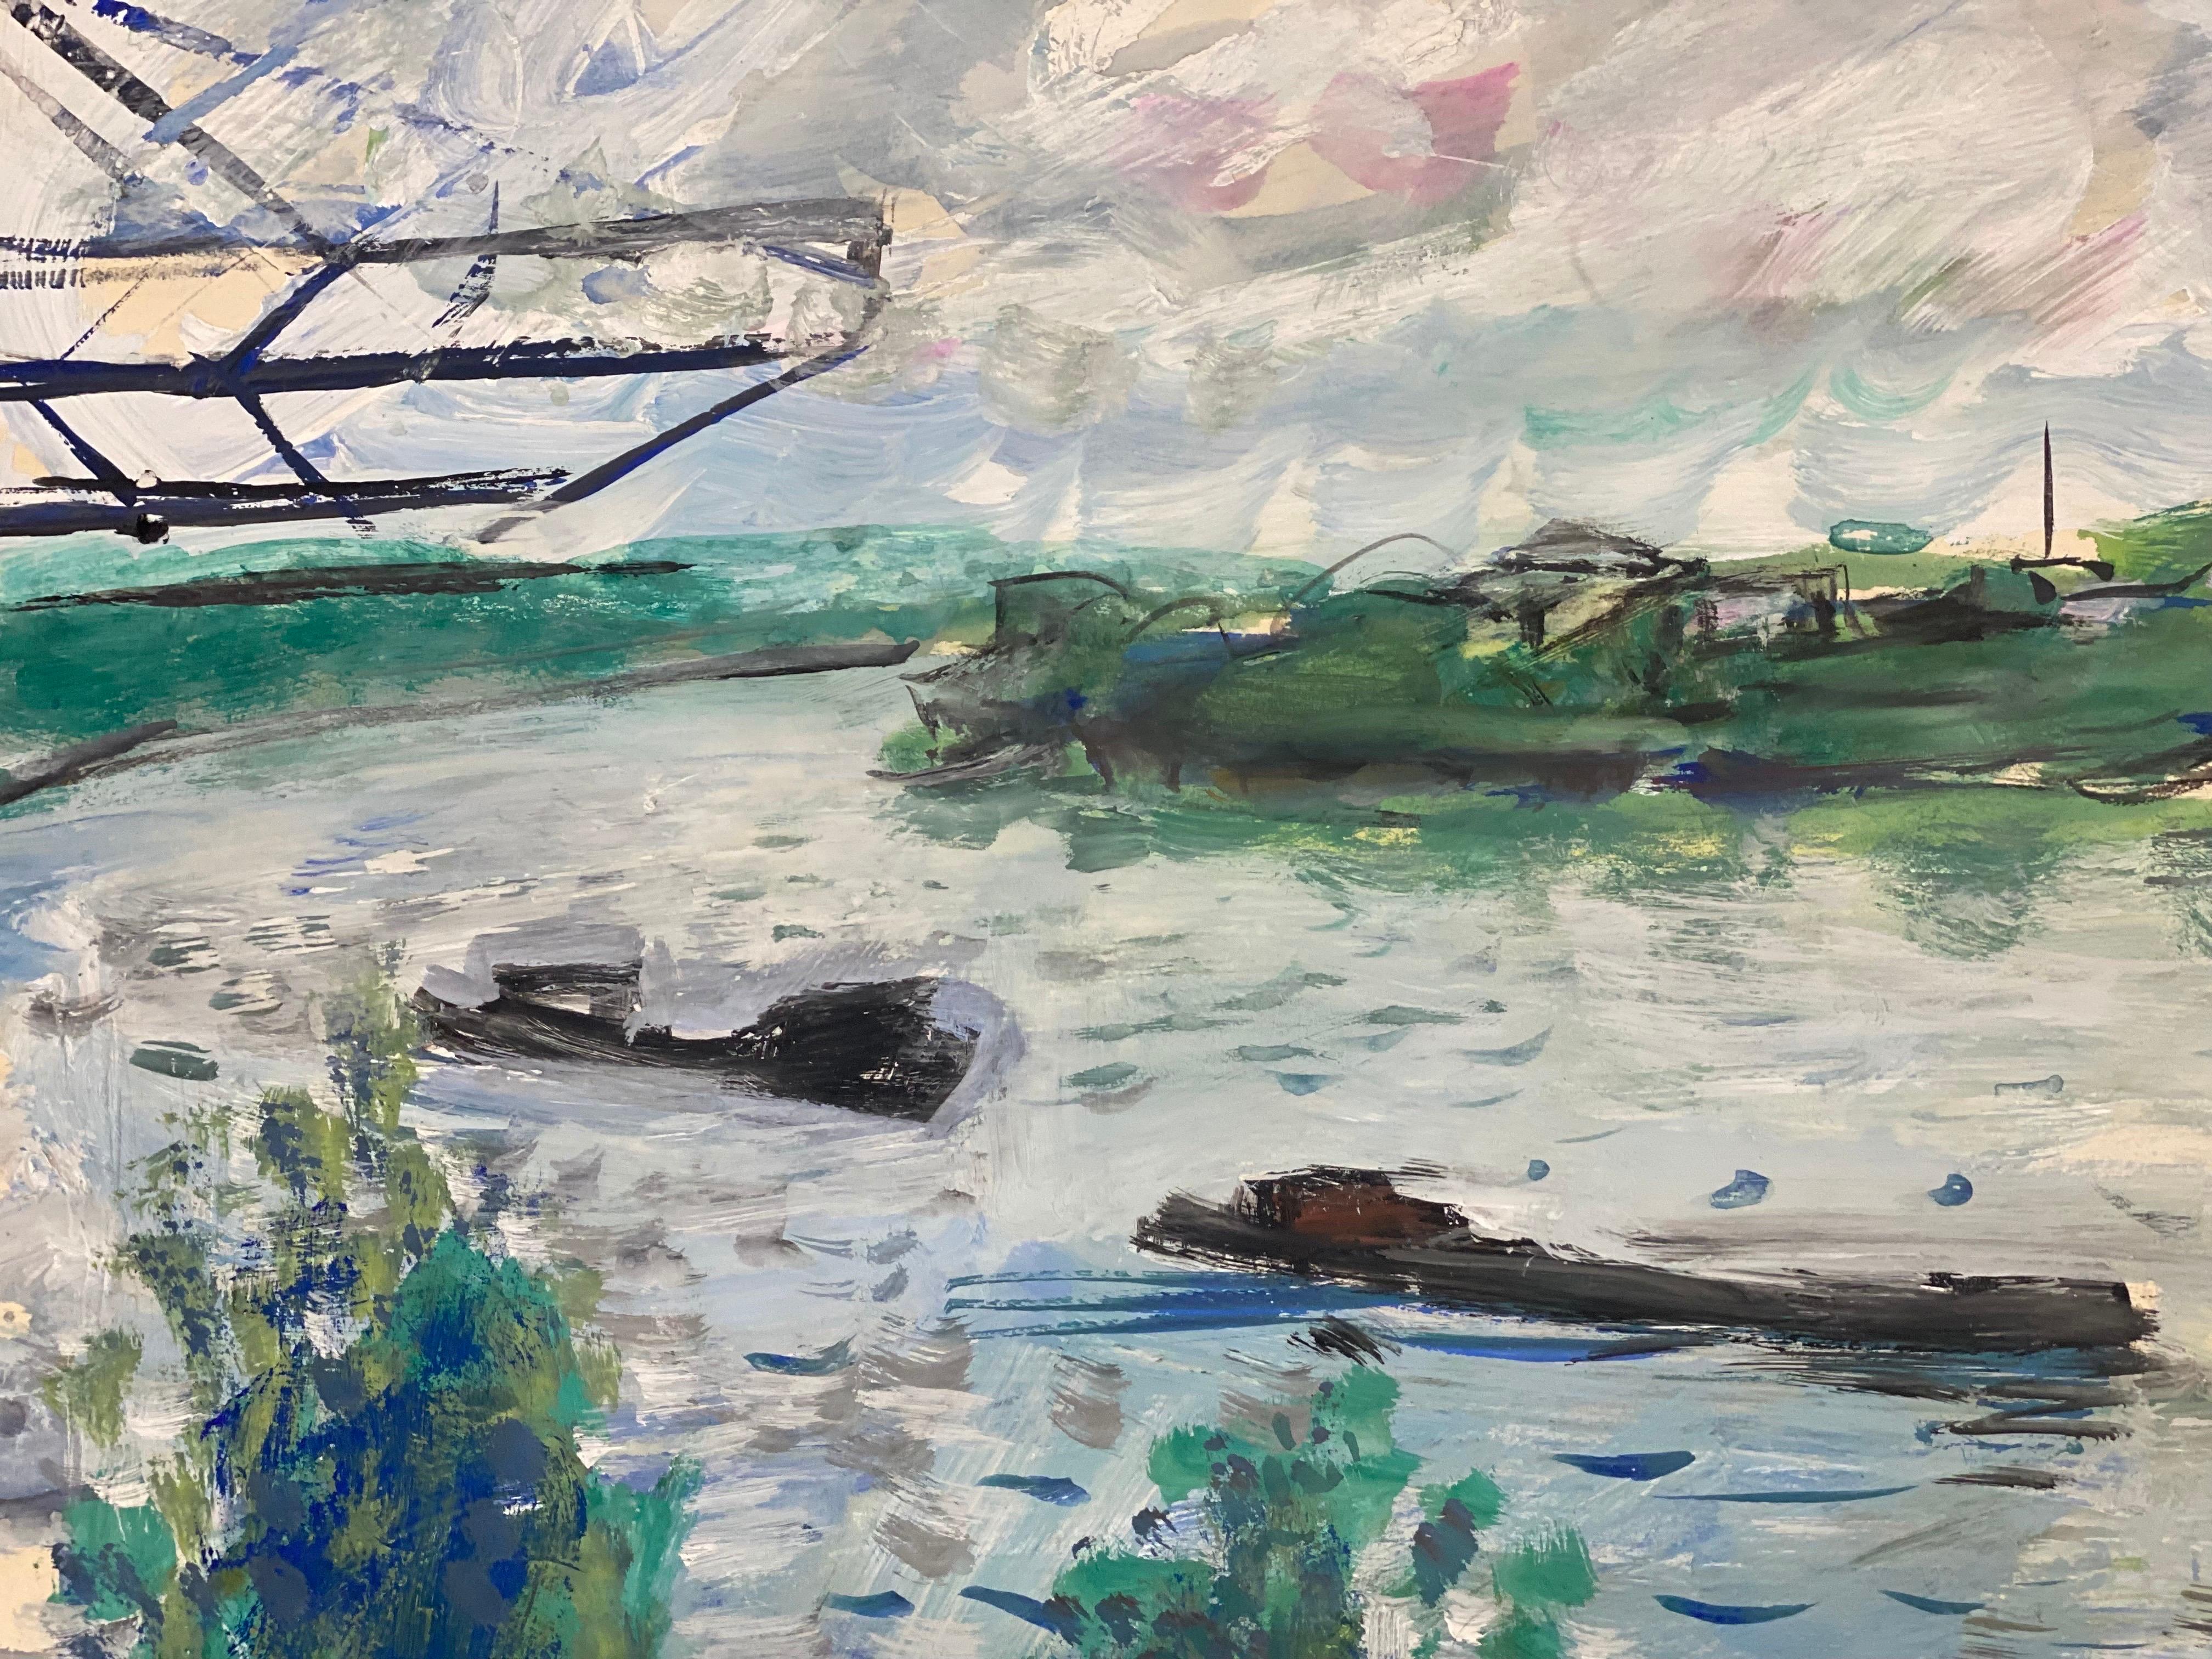 Landscape
Signed by Édouard Righetti (1924-2001)
Inscribed Verso on back

oil/gouache painting on artist paper, beautifully painted.
very good condition
size: 17 x inches x 24.75 inches
provenance: all the paintings we have for sale by this